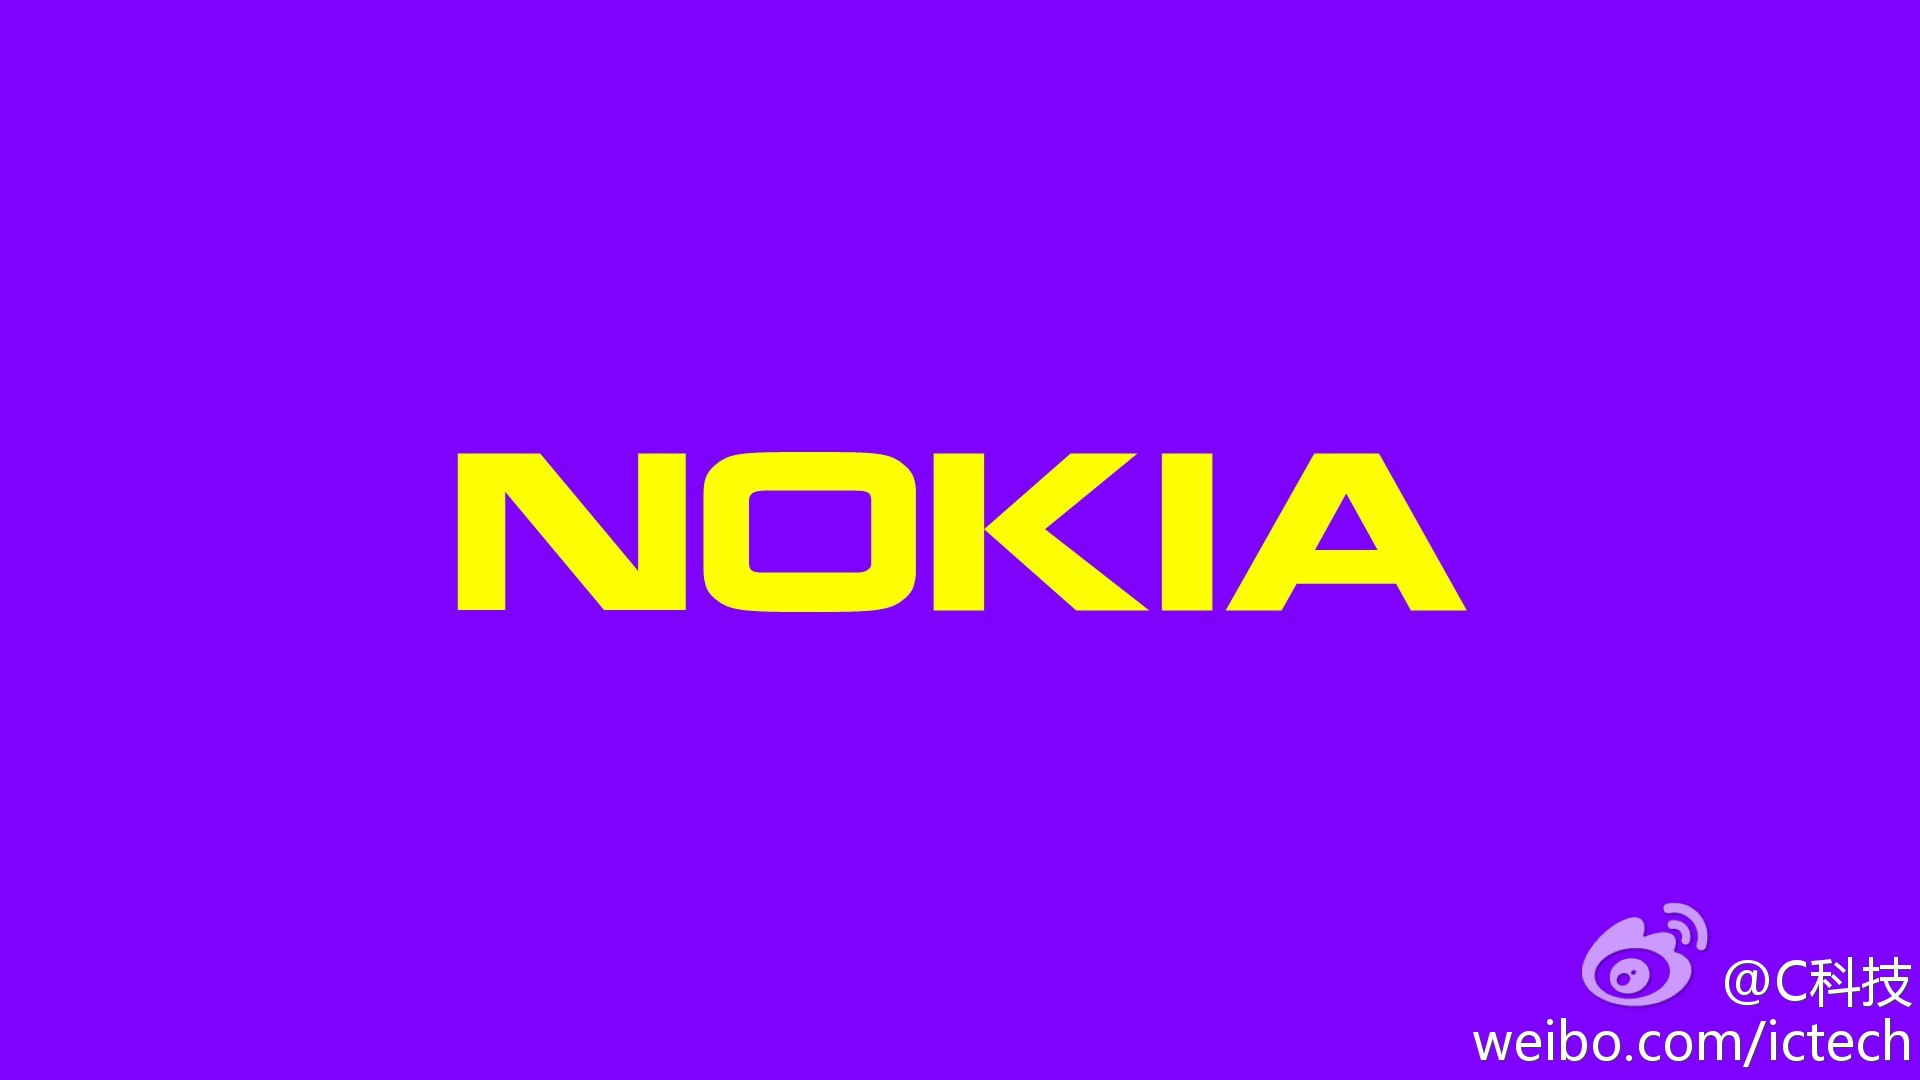 Another Nokia World Archives | Windows Blog